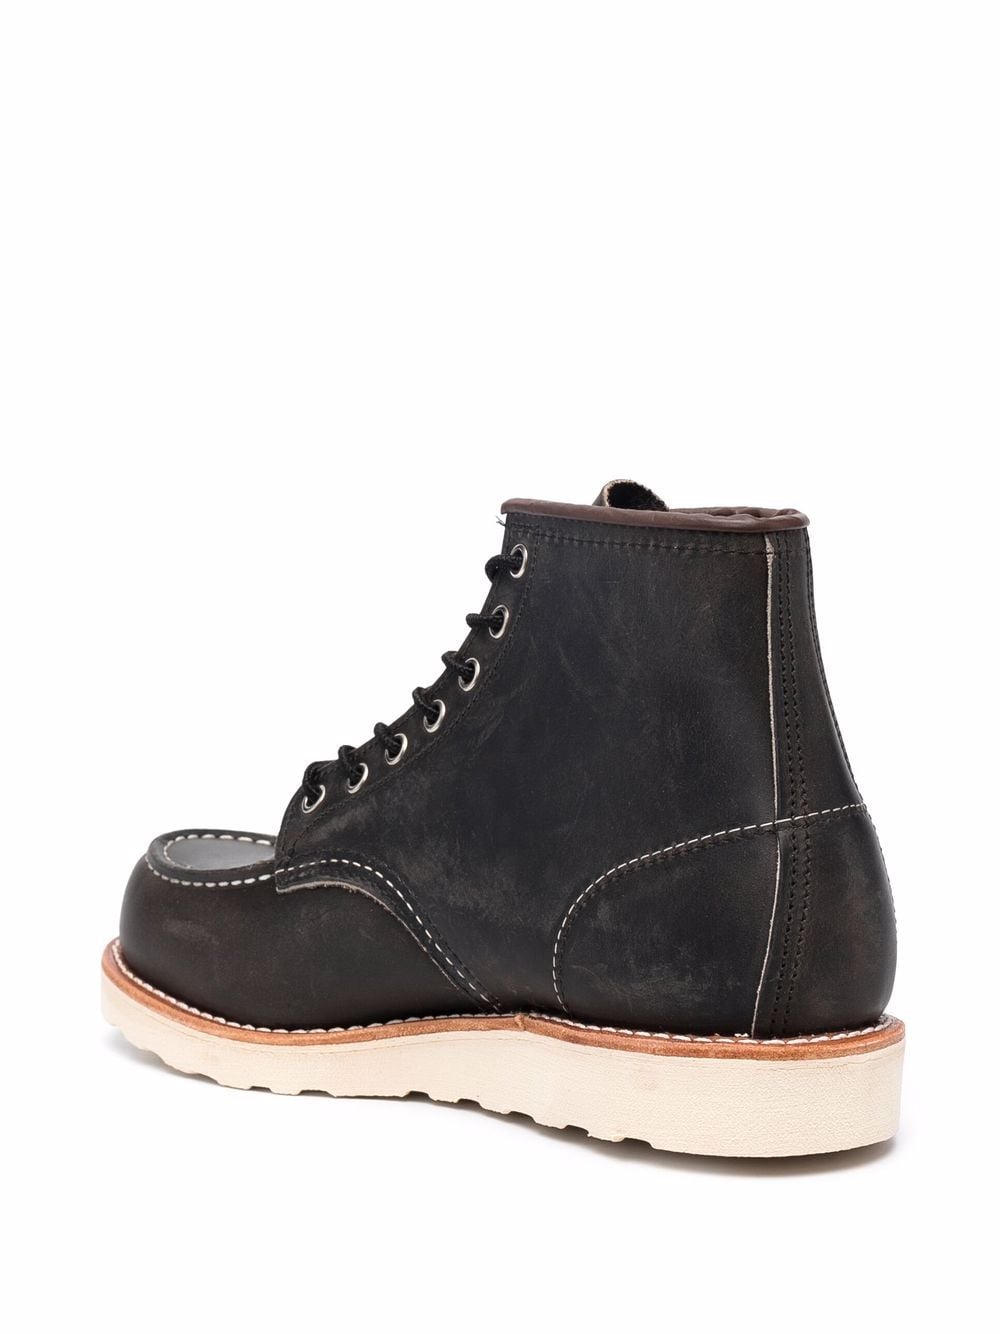 Espresso brown leather ankle lace-up boots